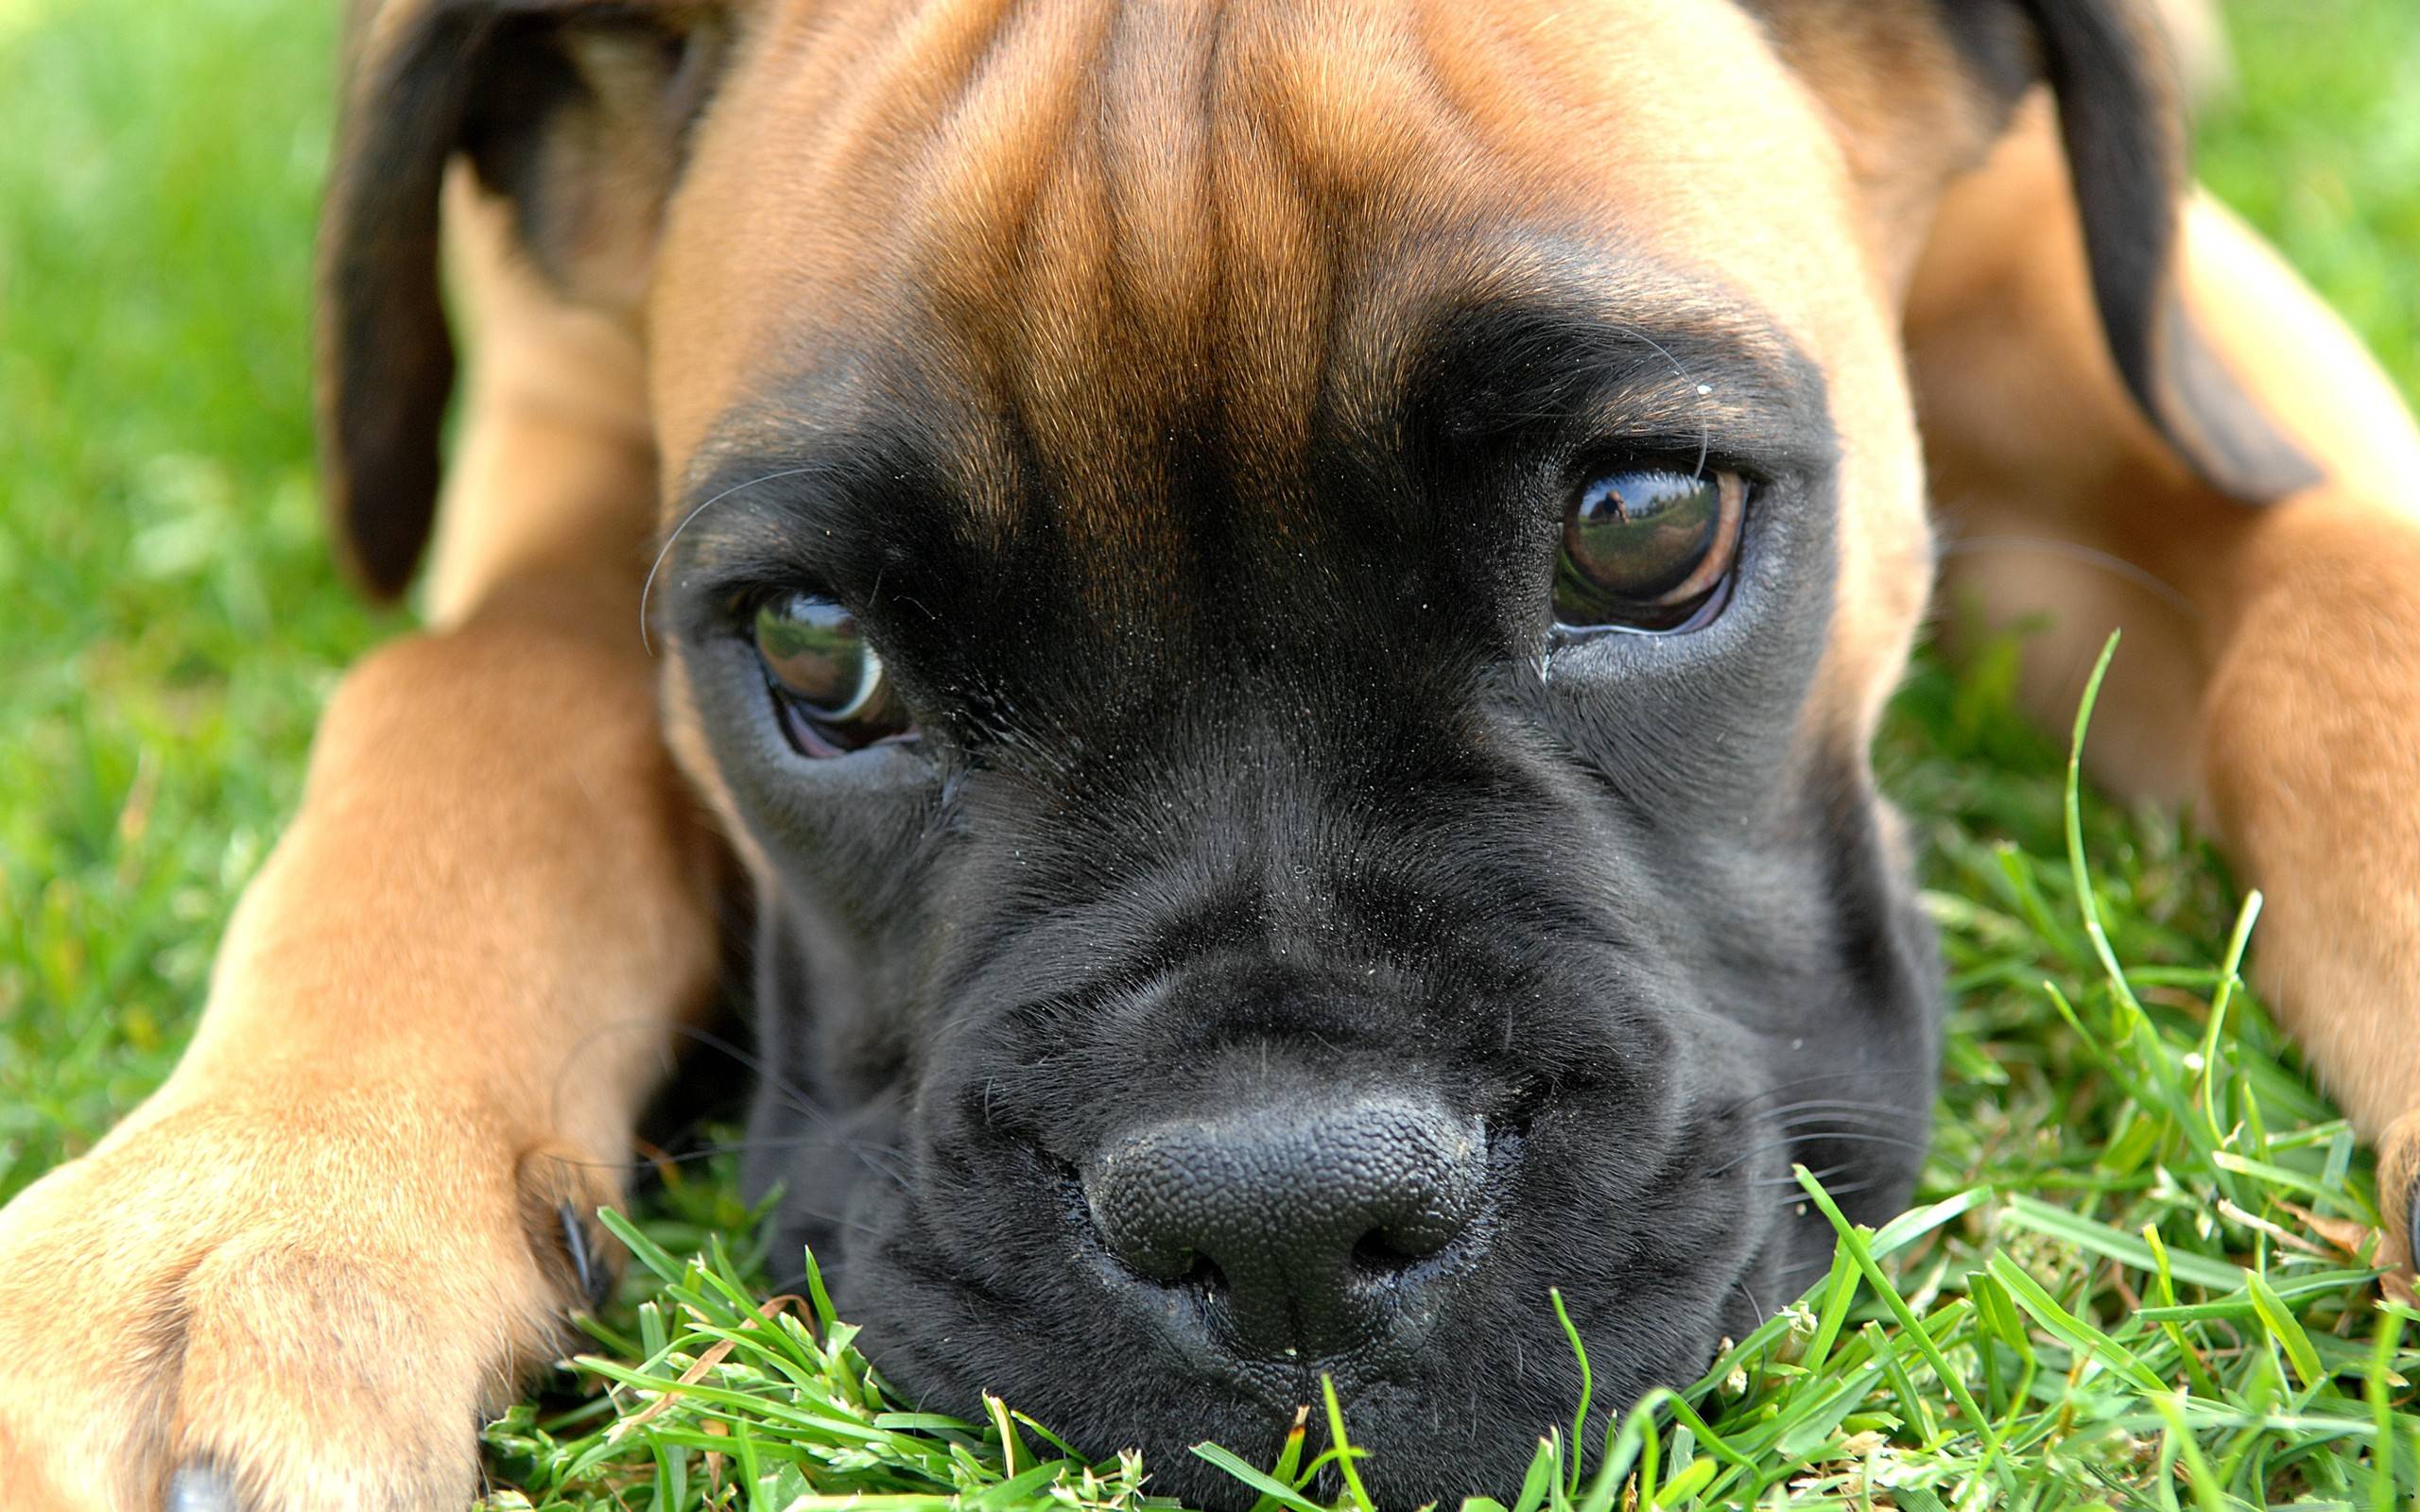 Boxer Dog Wallpapers - Wallpaper Cave